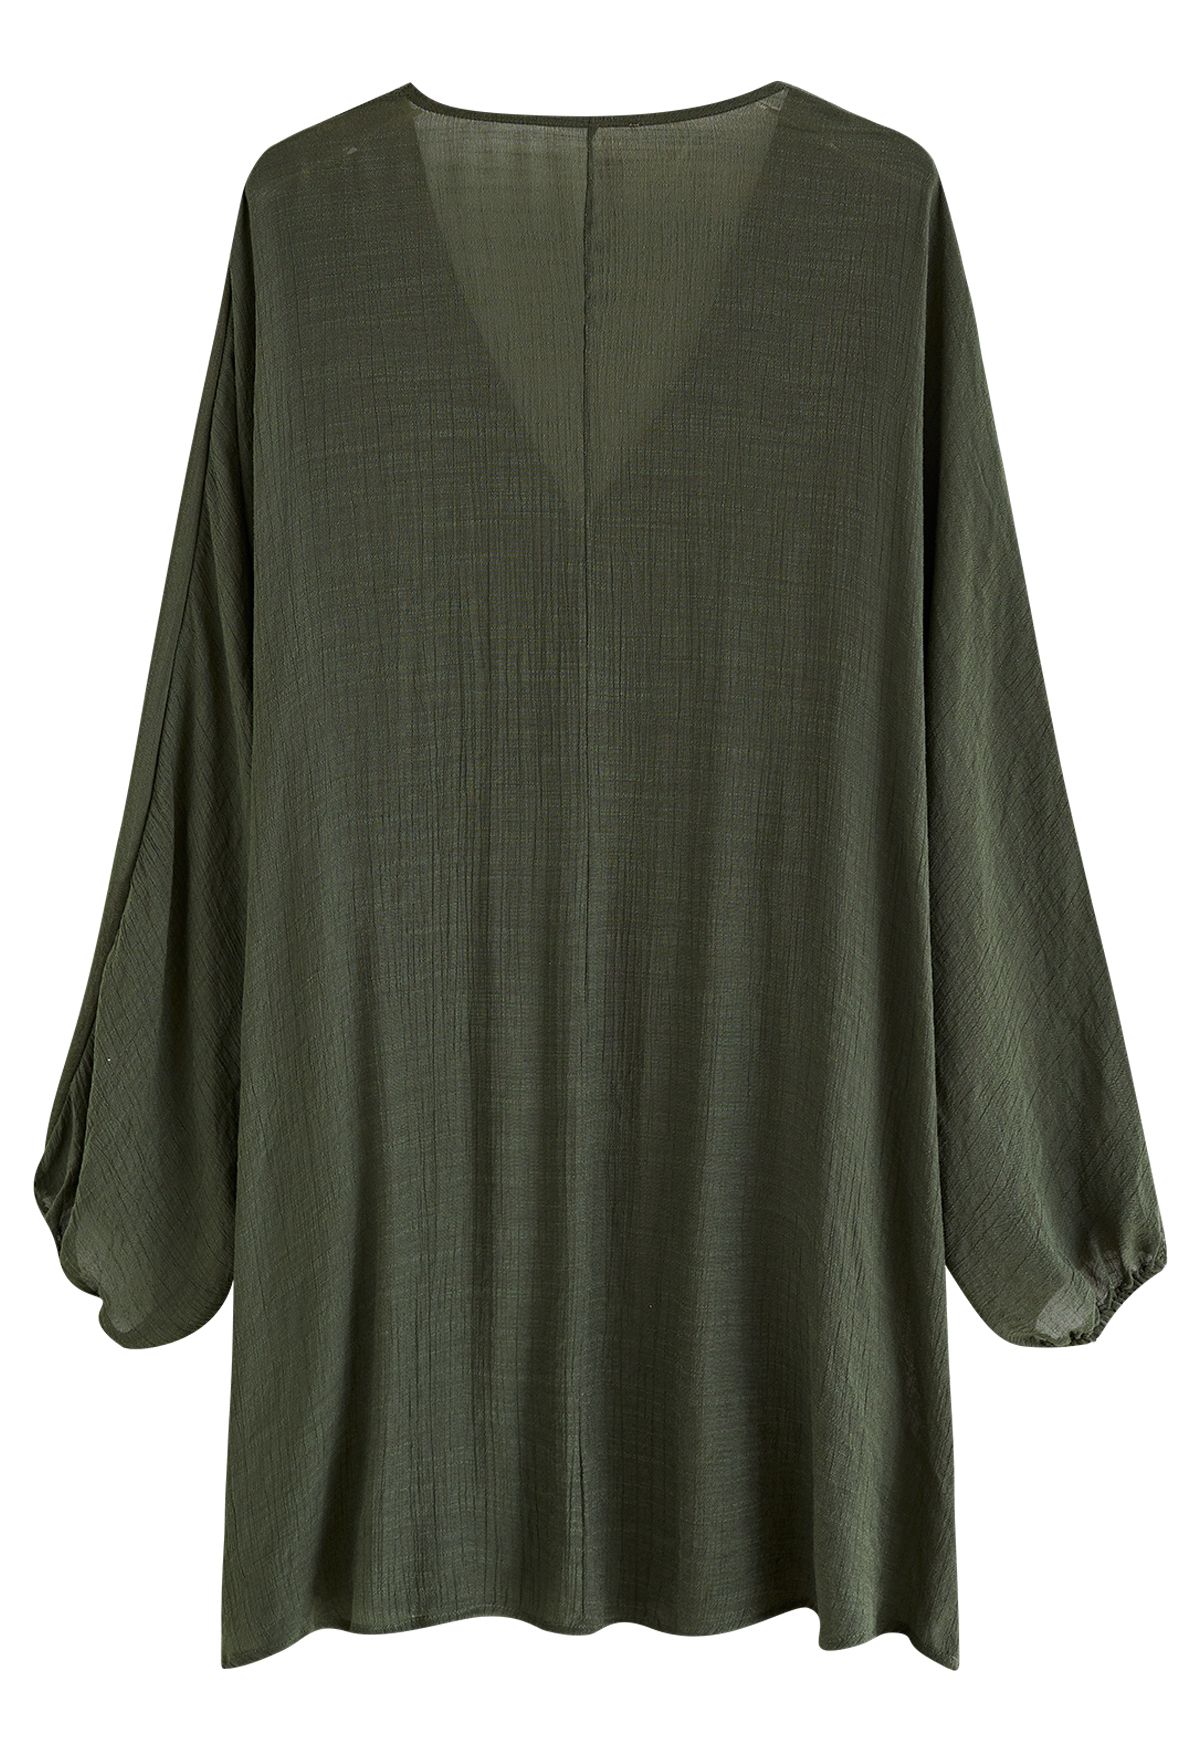 Batwing Sleeves V-Neck Tunic in Army Green